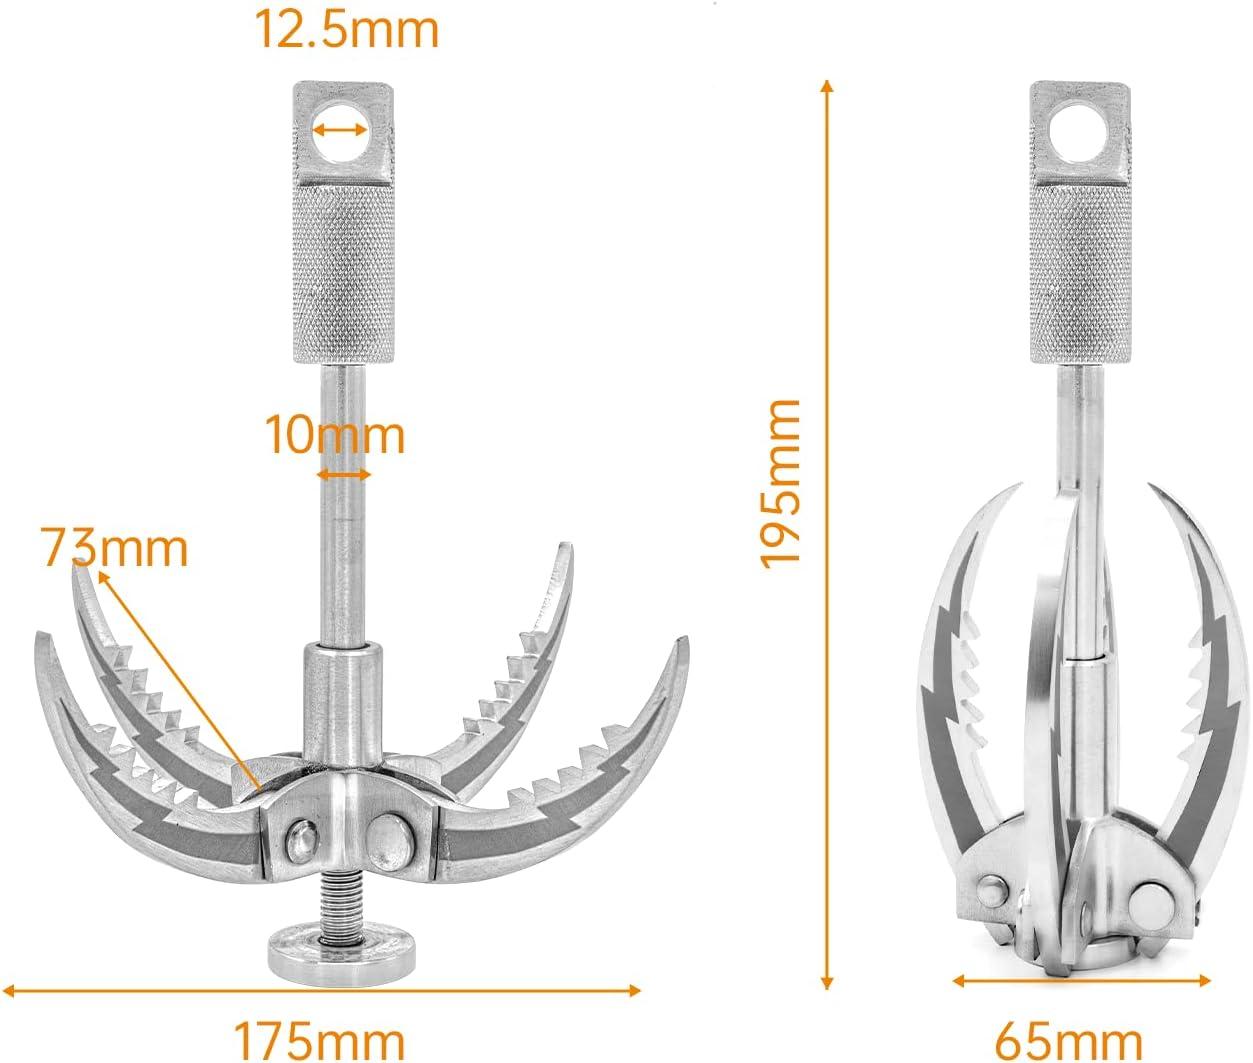 JWWYJ Folding Claw Grappling Hook - Multifunctional Stainless Steel Hook  for Outdoor Survival, Camping, and Hiking